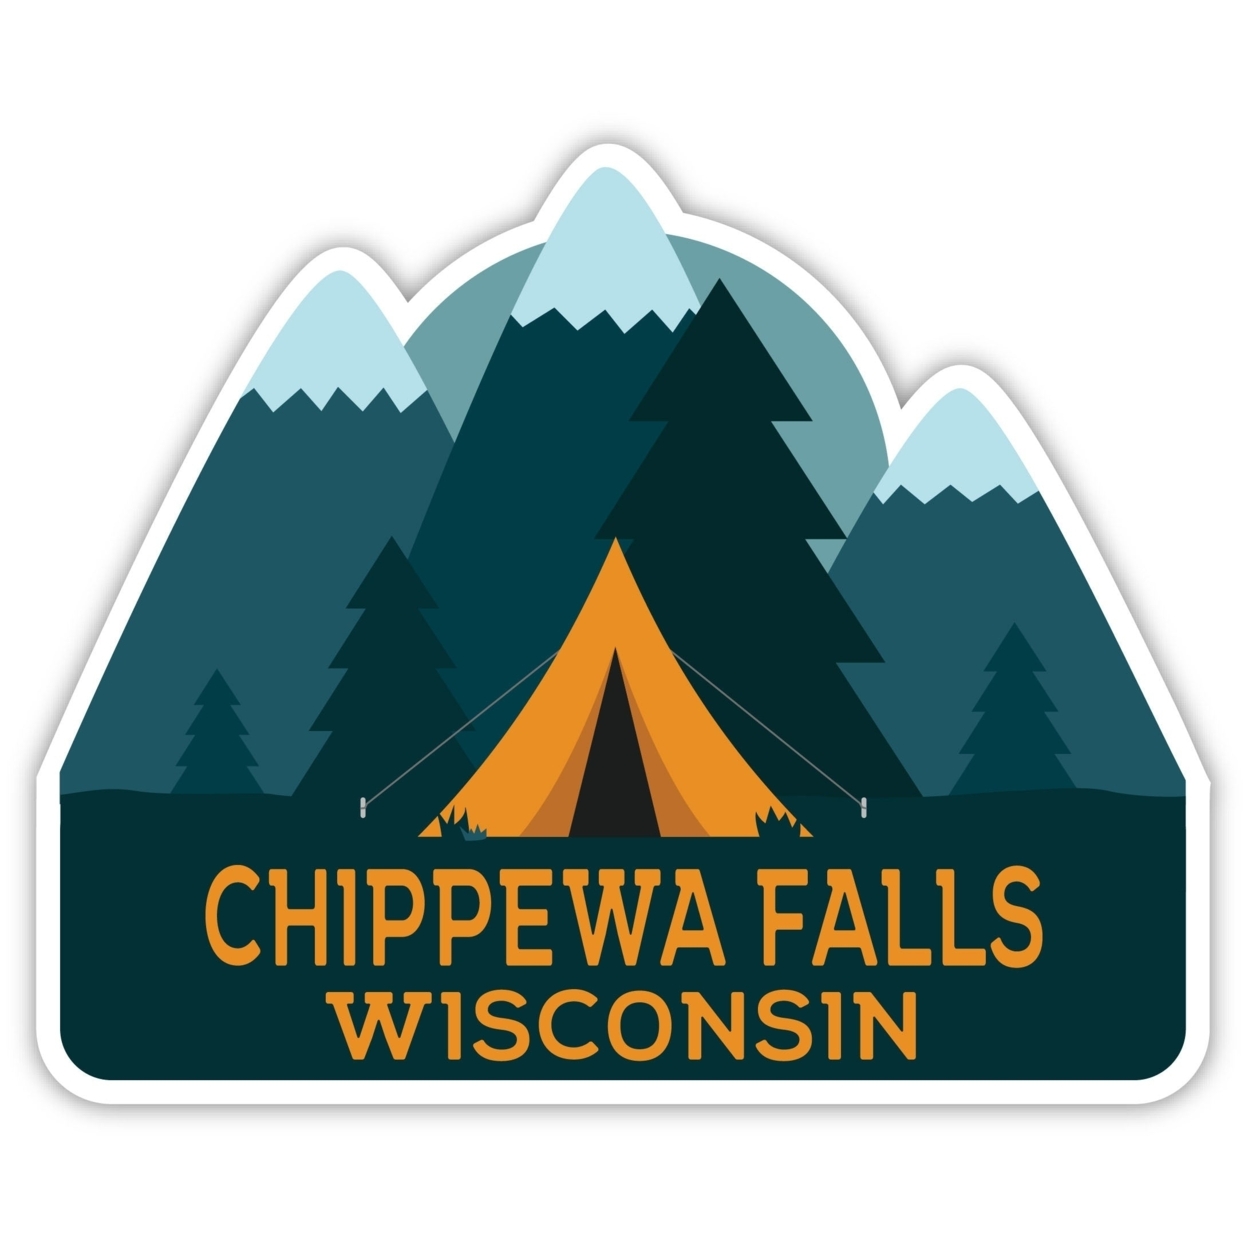 Chippewa Falls Wisconsin Souvenir Decorative Stickers (Choose Theme And Size) - 4-Pack, 12-Inch, Tent